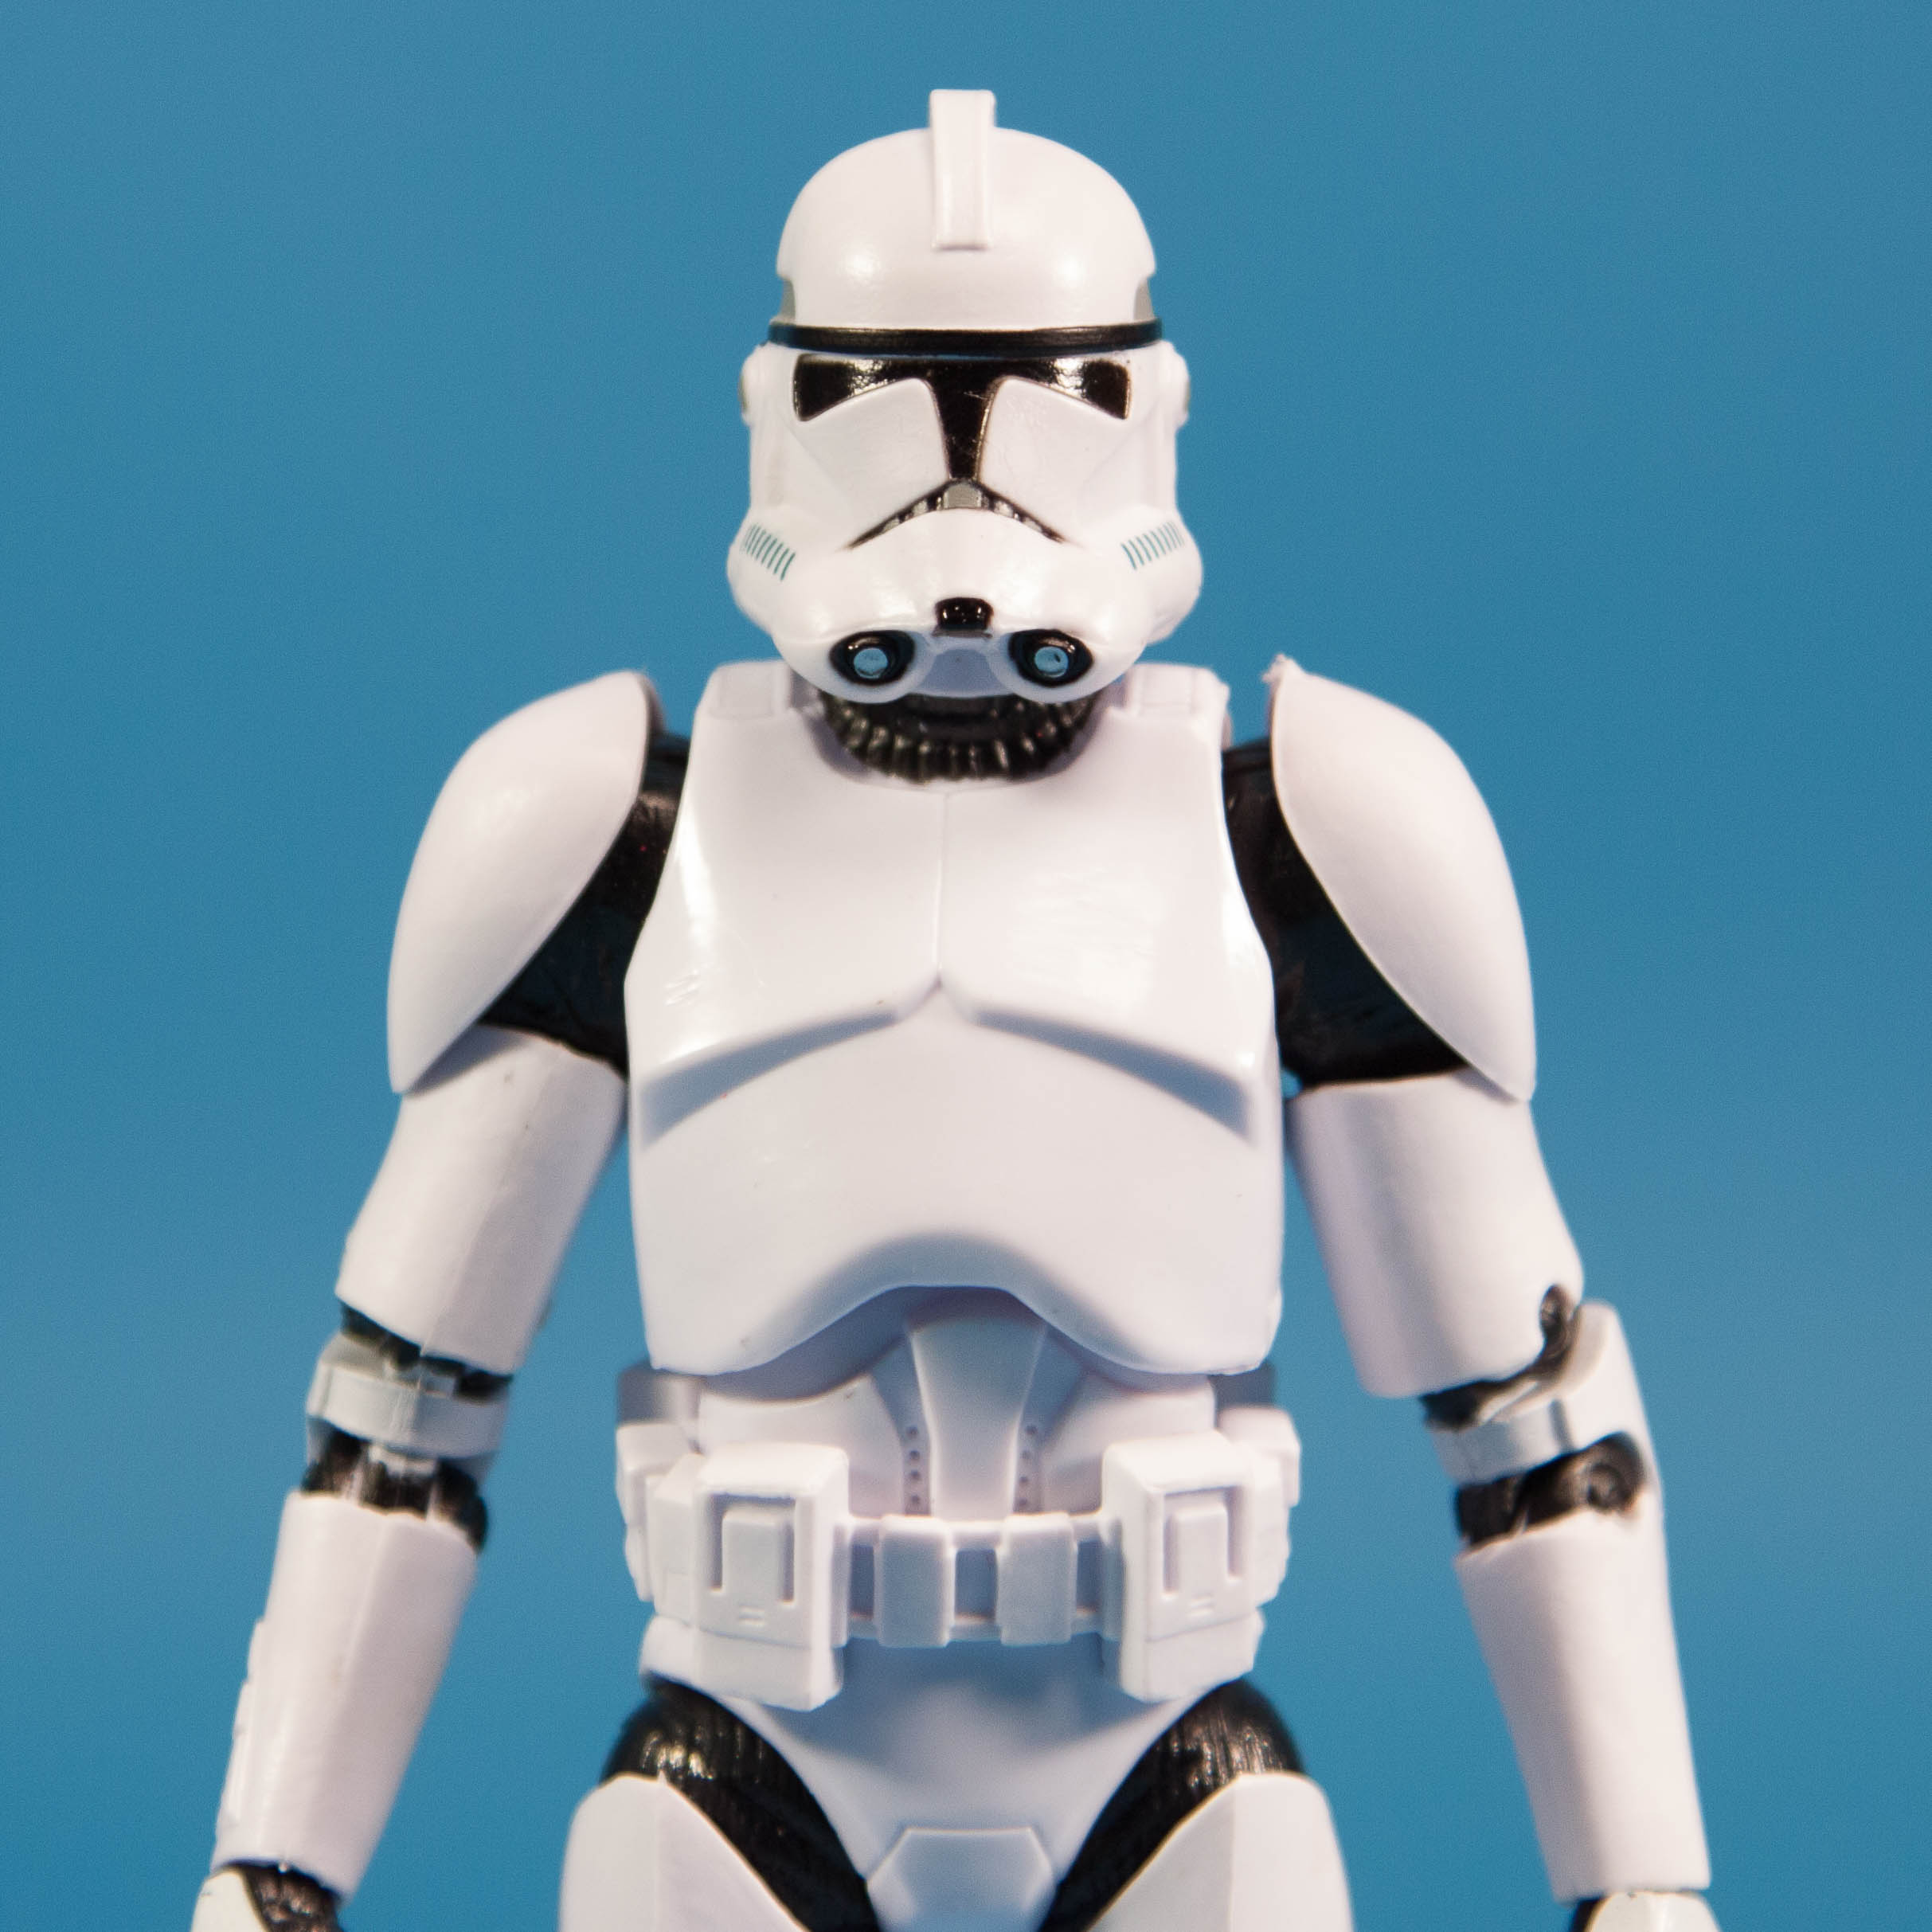 stormtrooper-collection-6-inch-4-pack-amazon-exclusive-016.jpg